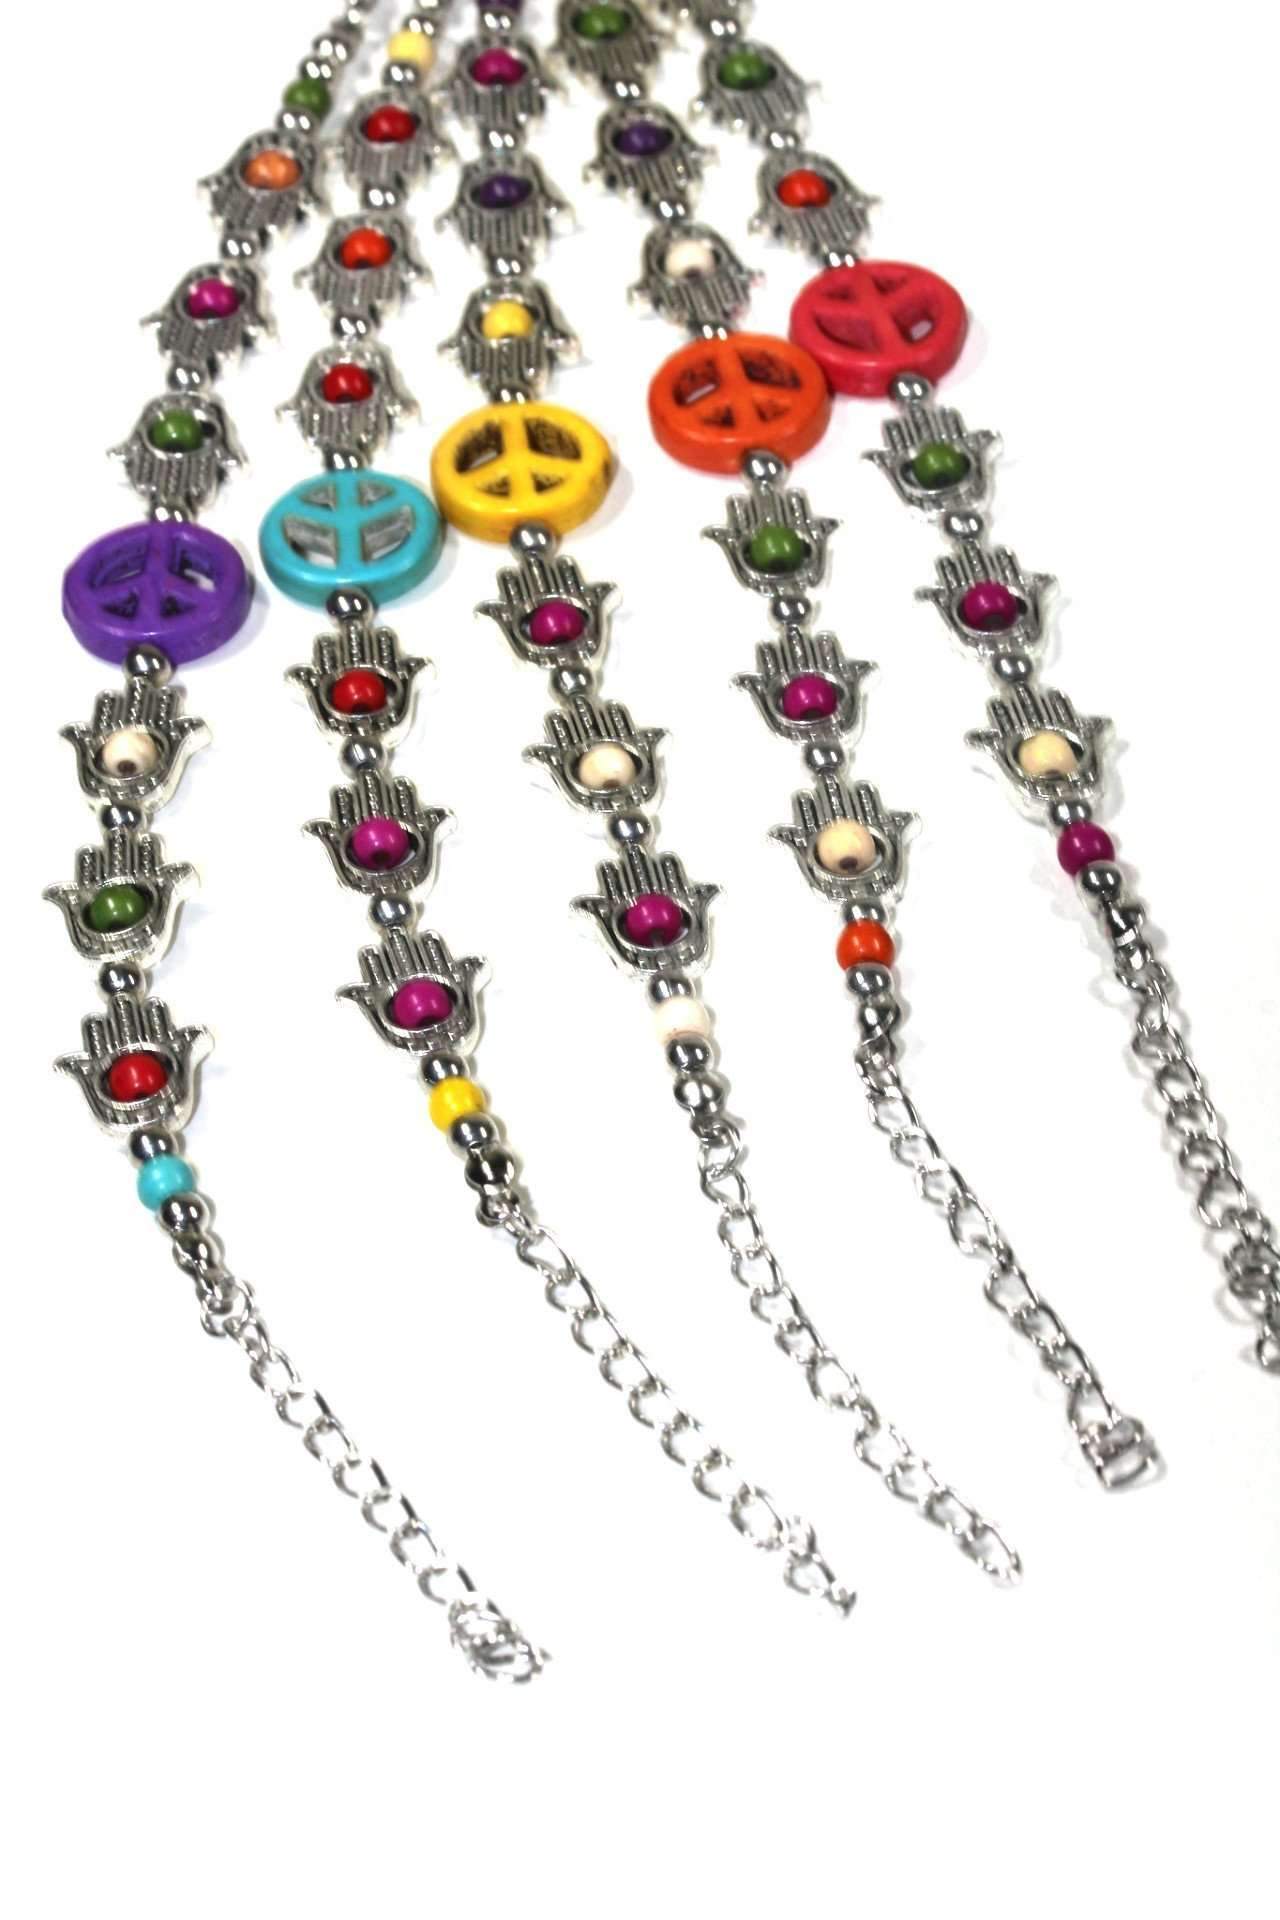 Hamsa Hand and Peace Charm Bracelet - Boho Style with Colorful Beads
Length: 6 inches with 1.5 inch extender. Lobster clasp closure. Base metal, beads. This bracelet features the divine Hamsa Hand - Bracelets - Bijou Her -  -  - 